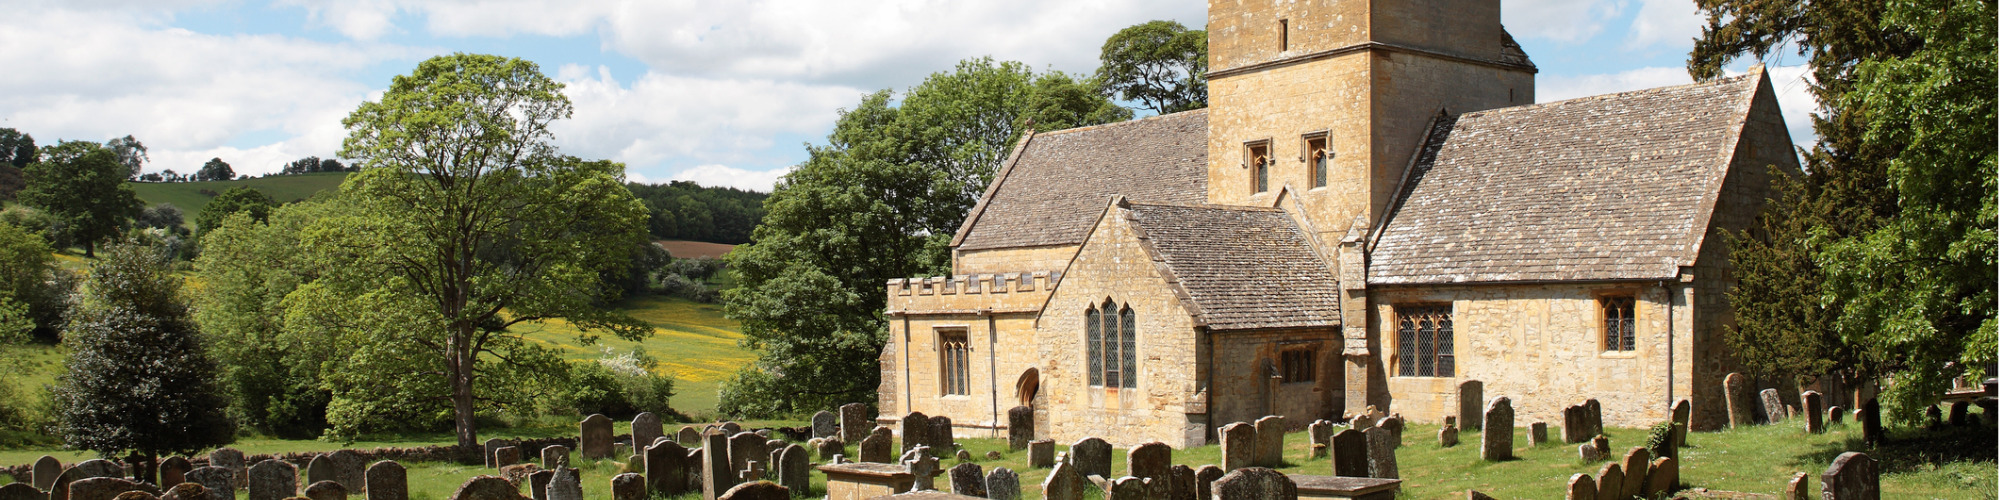 Chancel Repair Liability - A One Hour Guide for Conveyancers